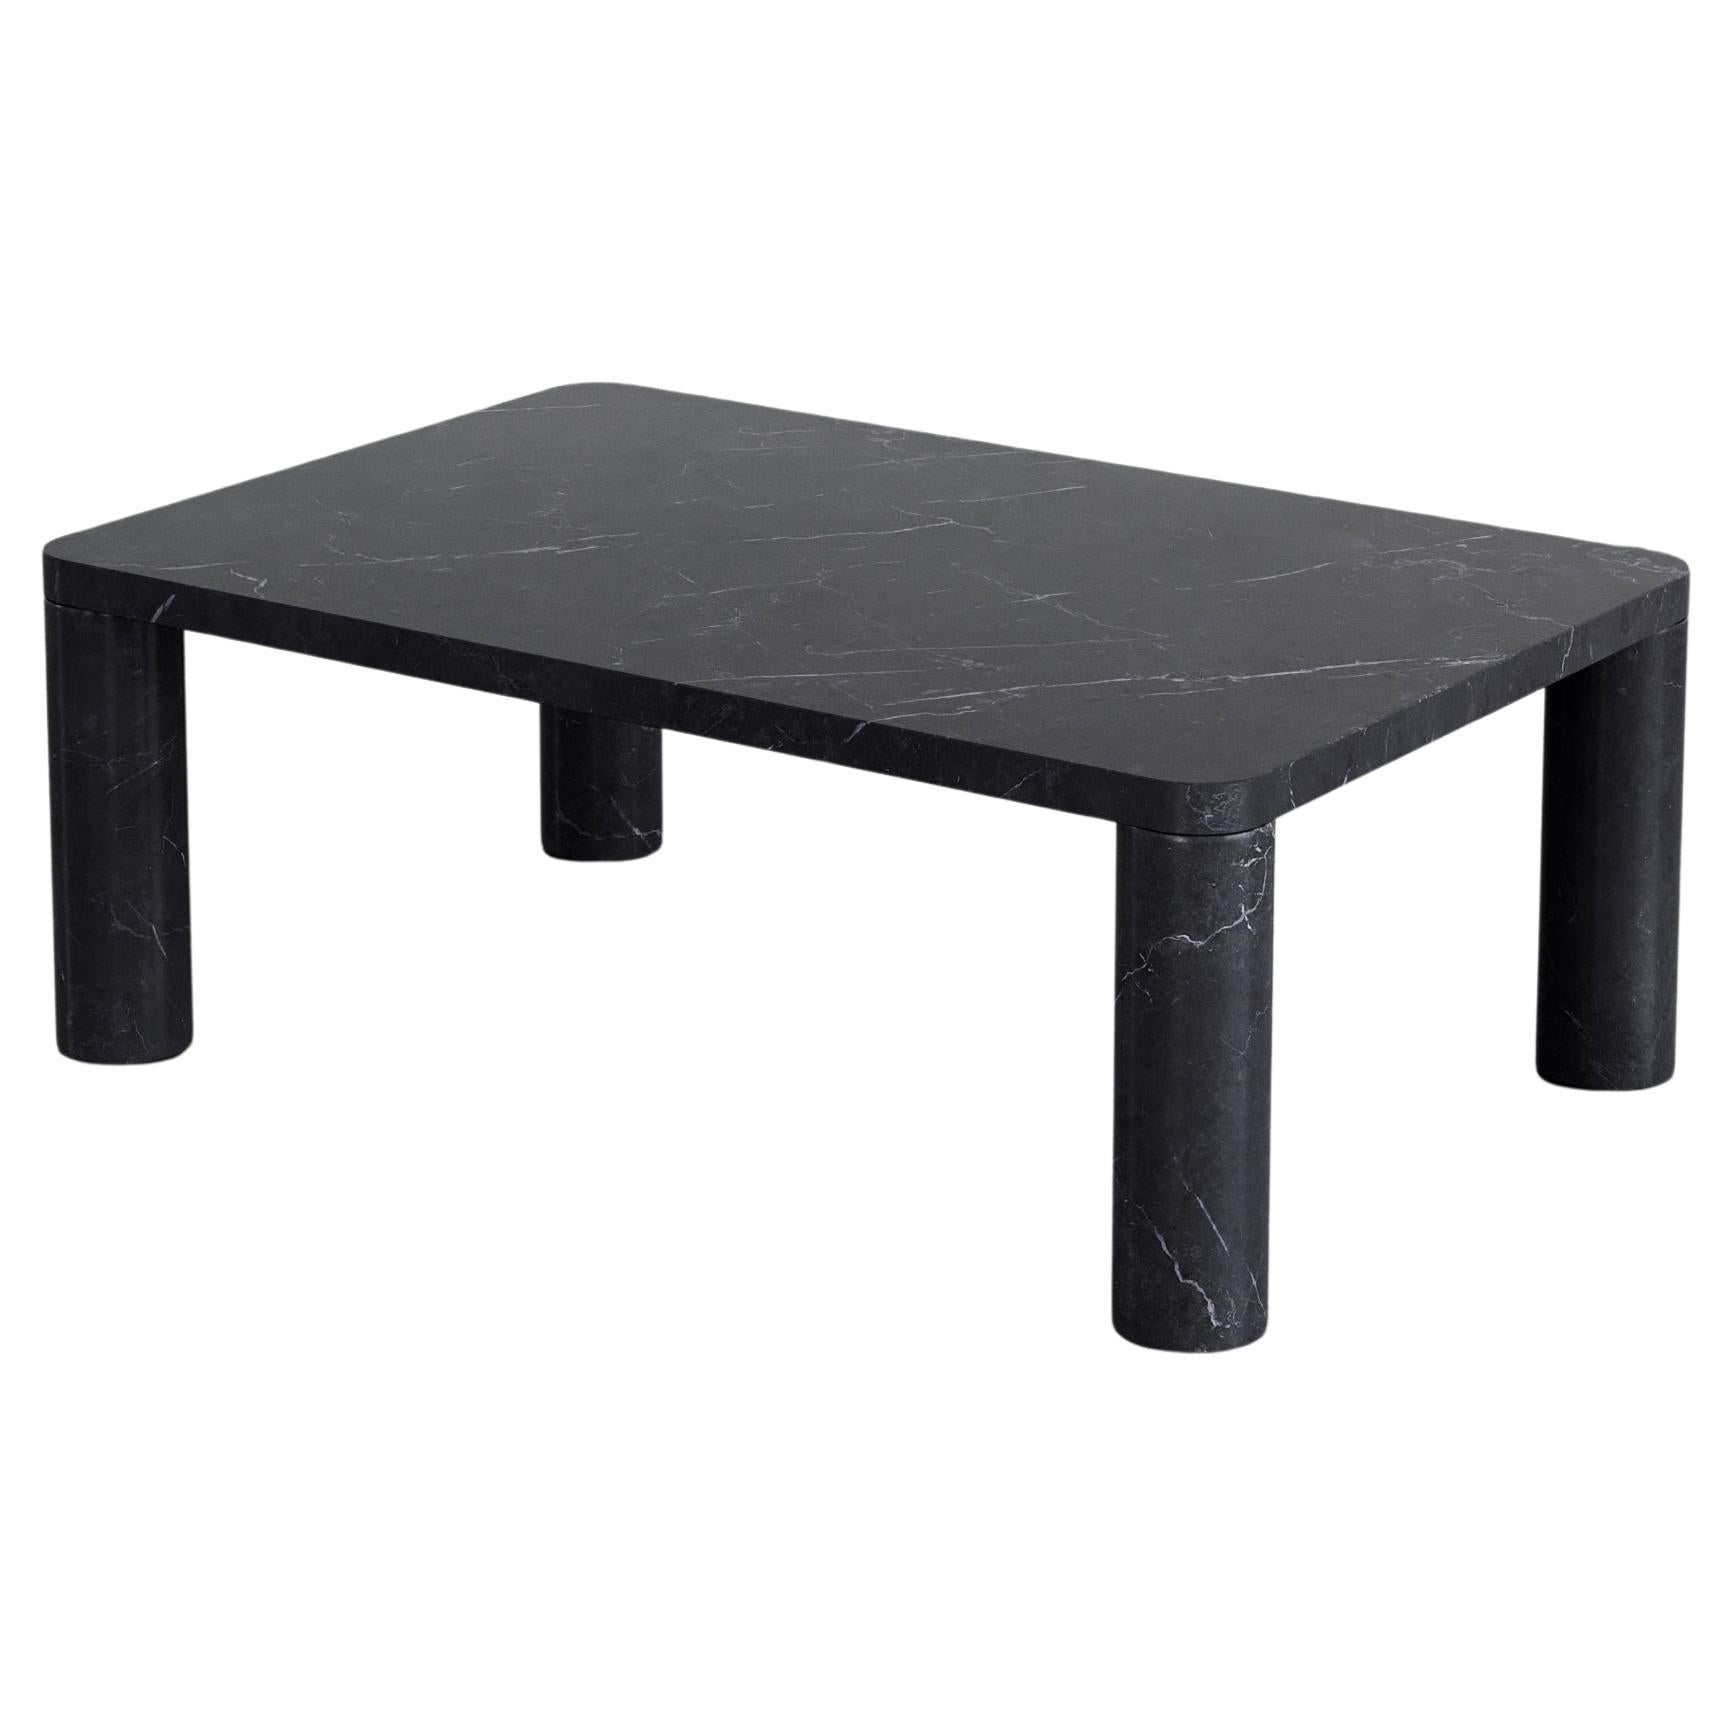 Nadia 96 Marble Coffee Table By Agglomerati For Sale